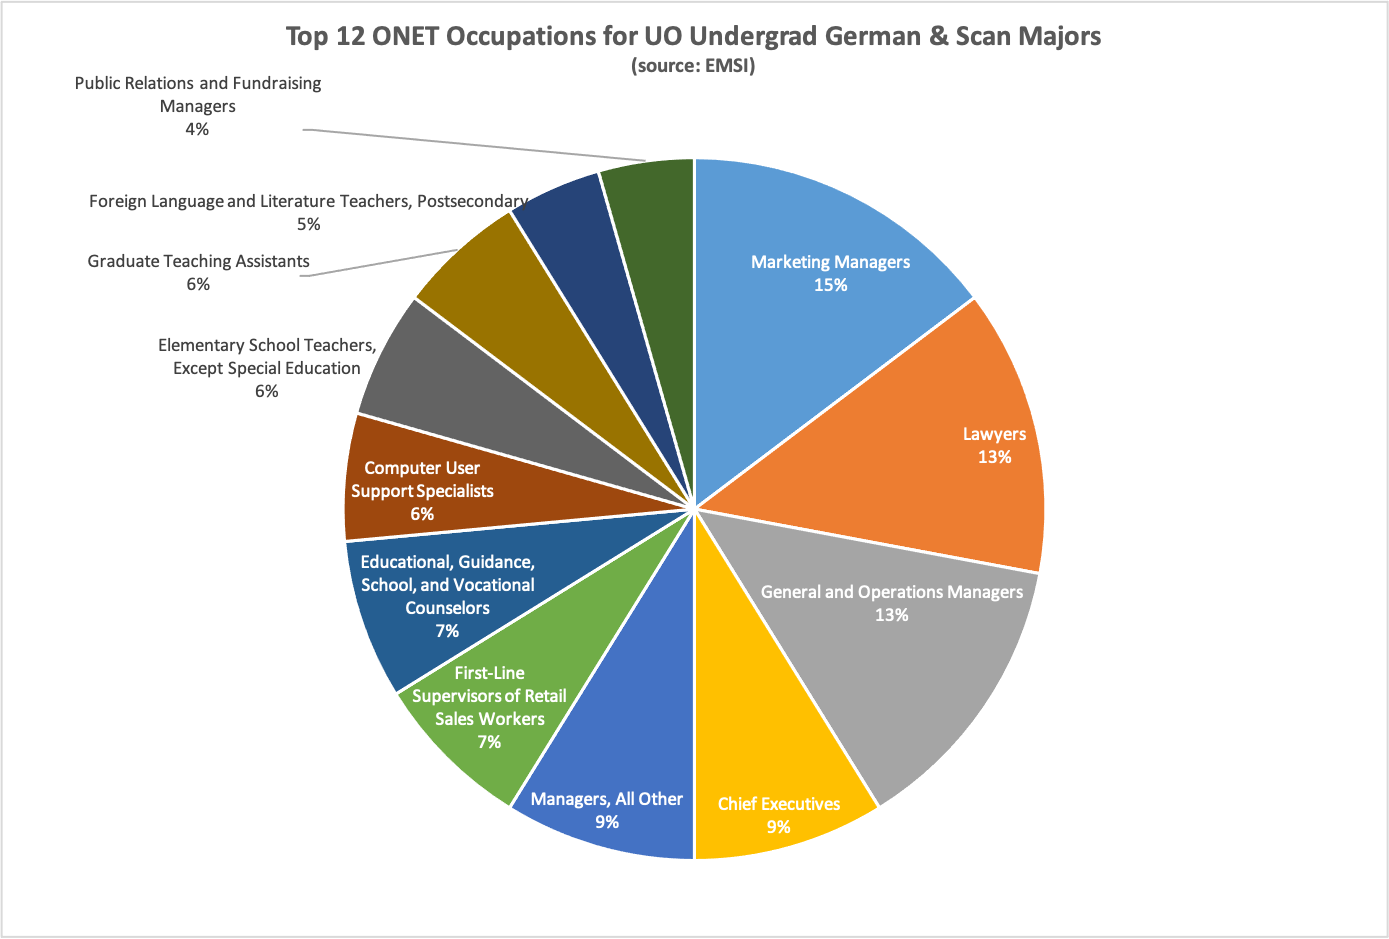 Top 12 ONET Occupations for UO Undergrad German and Scan majors pie chart